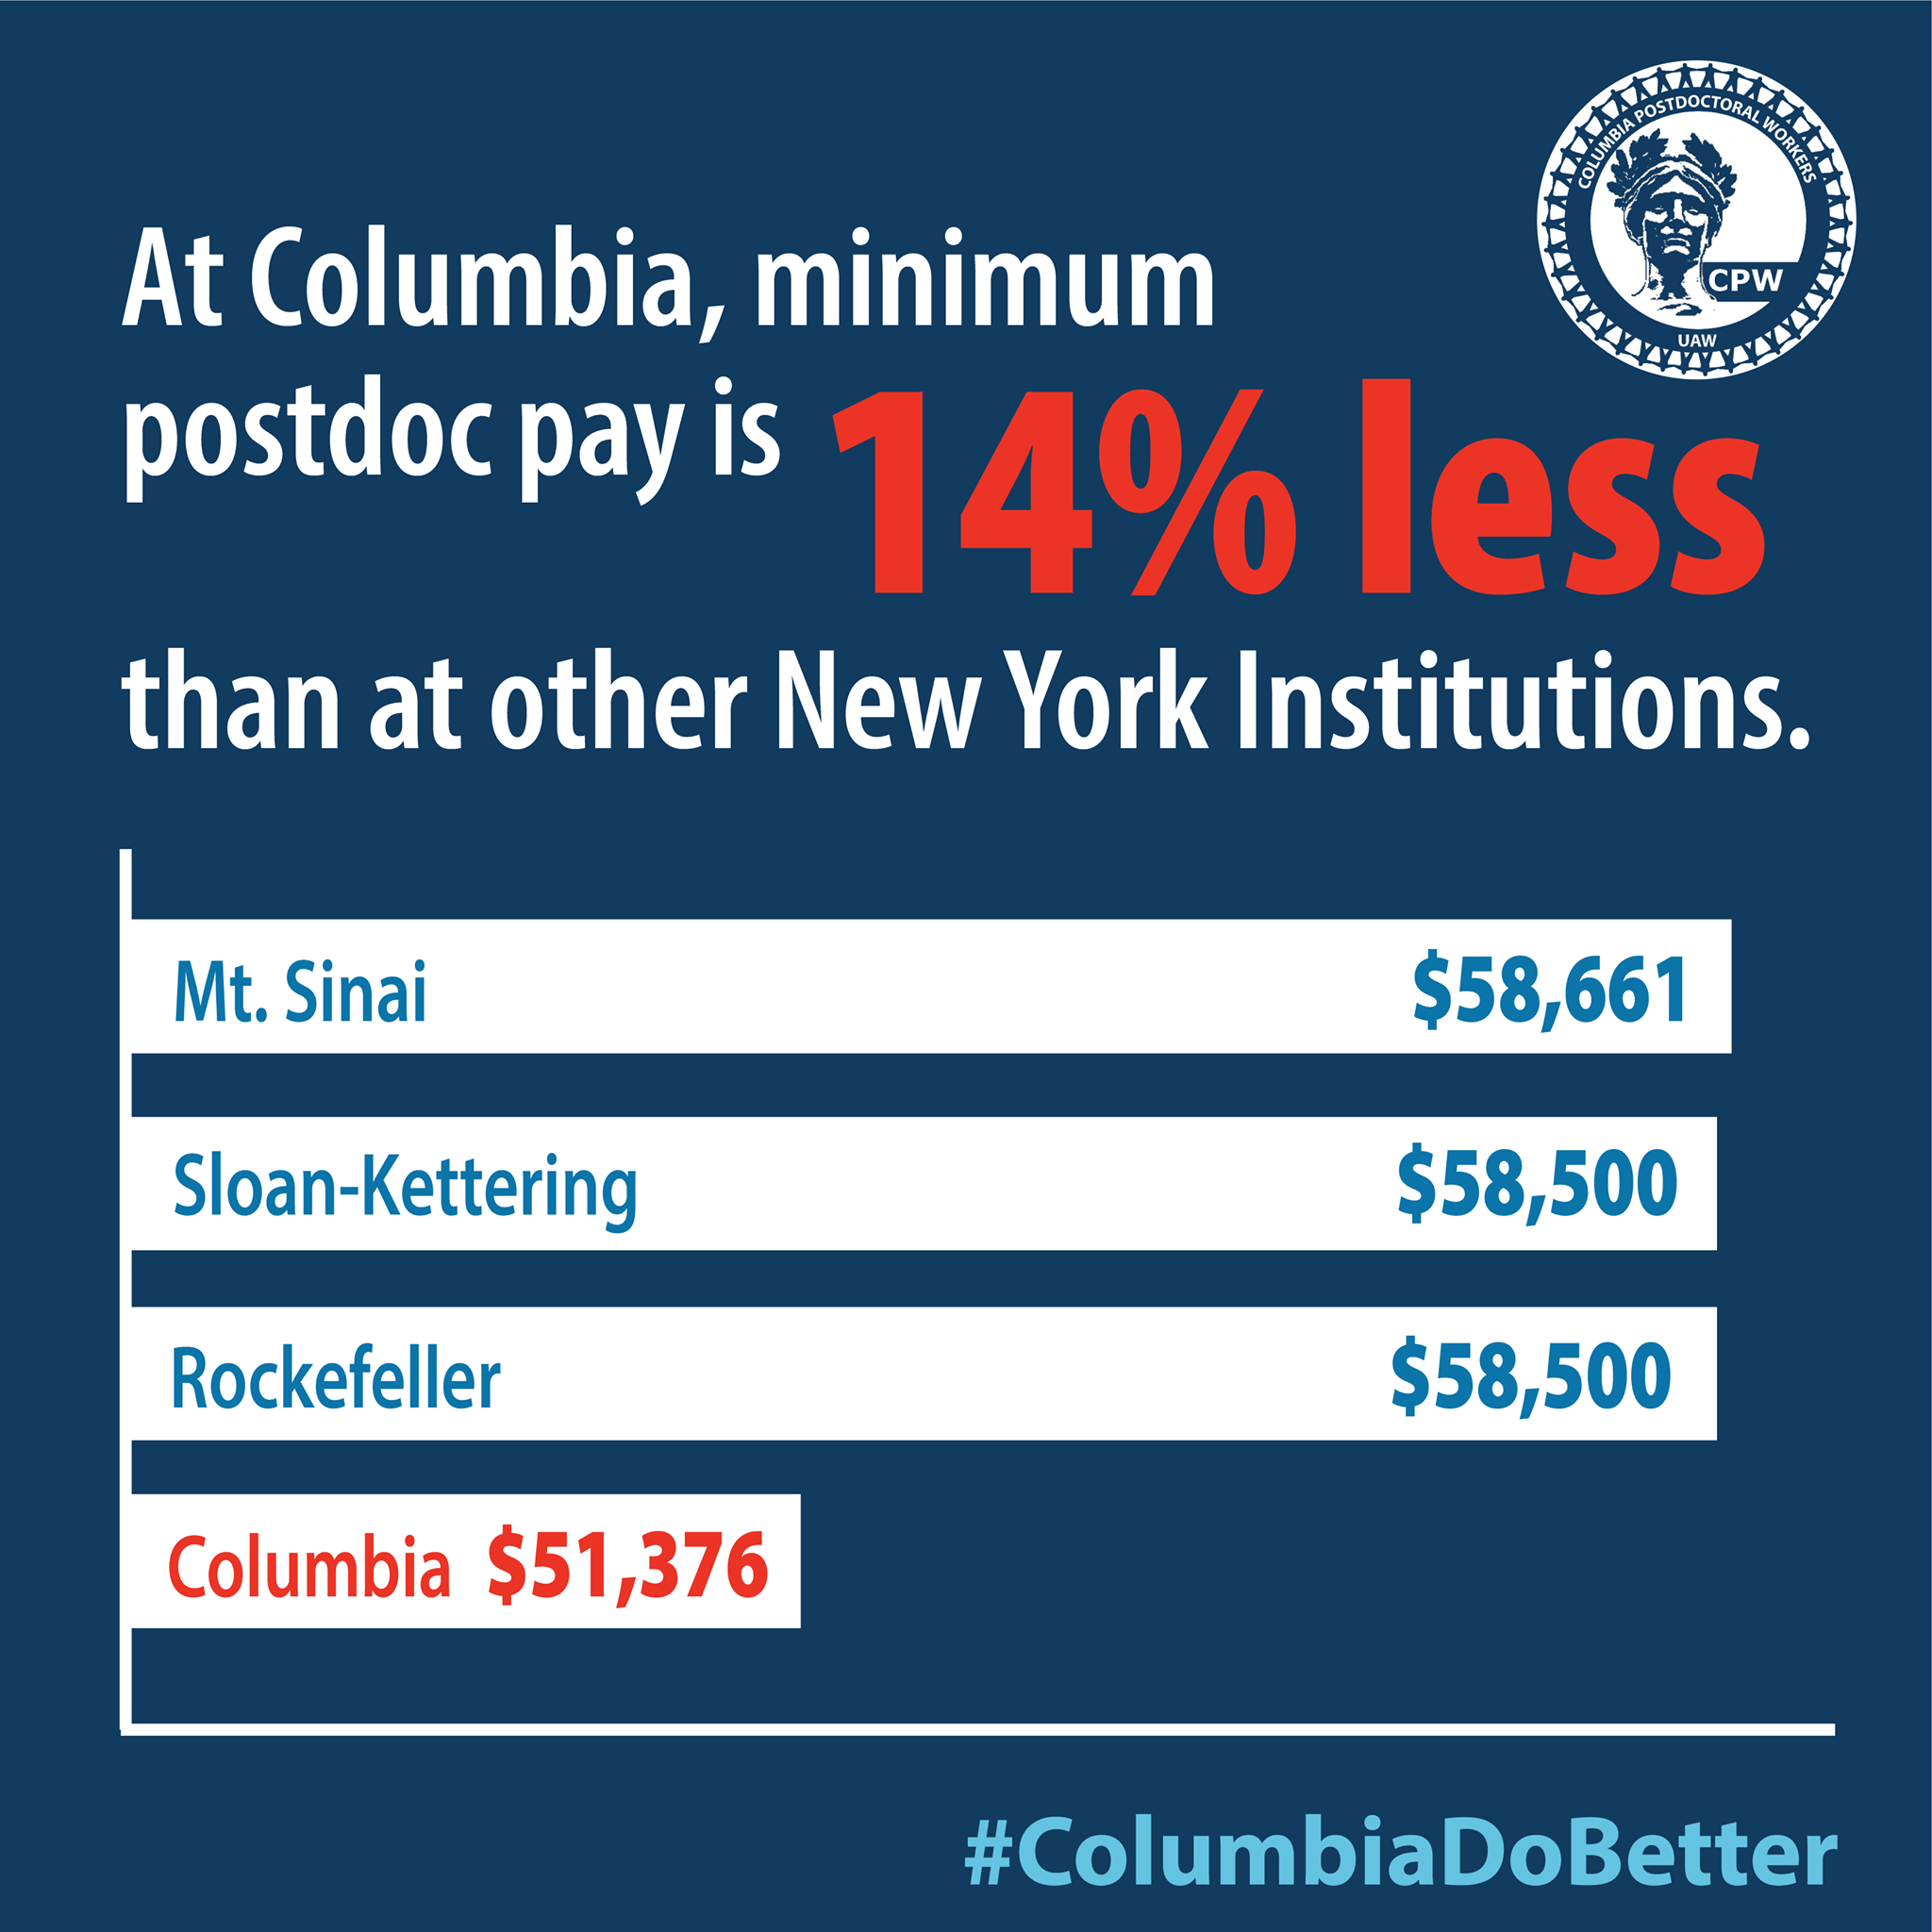 Fair compensation can build a stronger, more inclusive research community at Columbia.